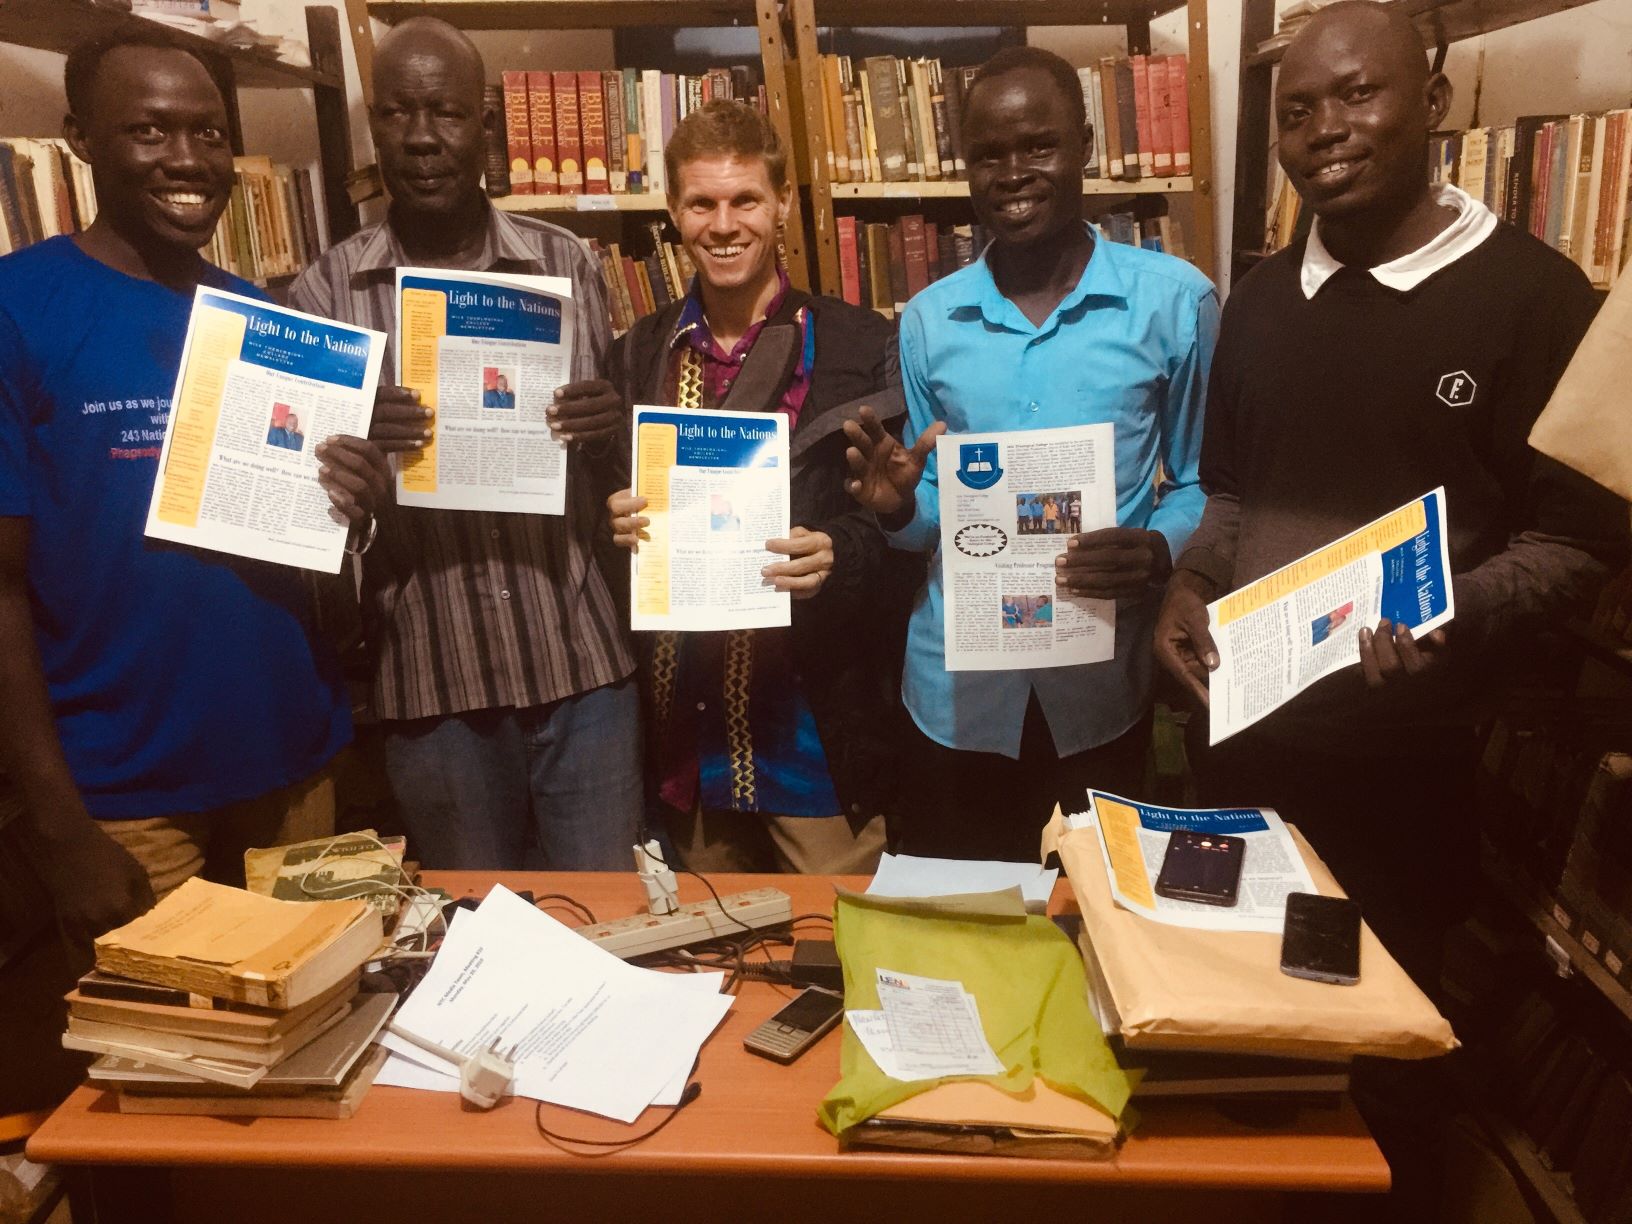 The Media Team at Nile Theological College proudly displays the newsletter they produced.